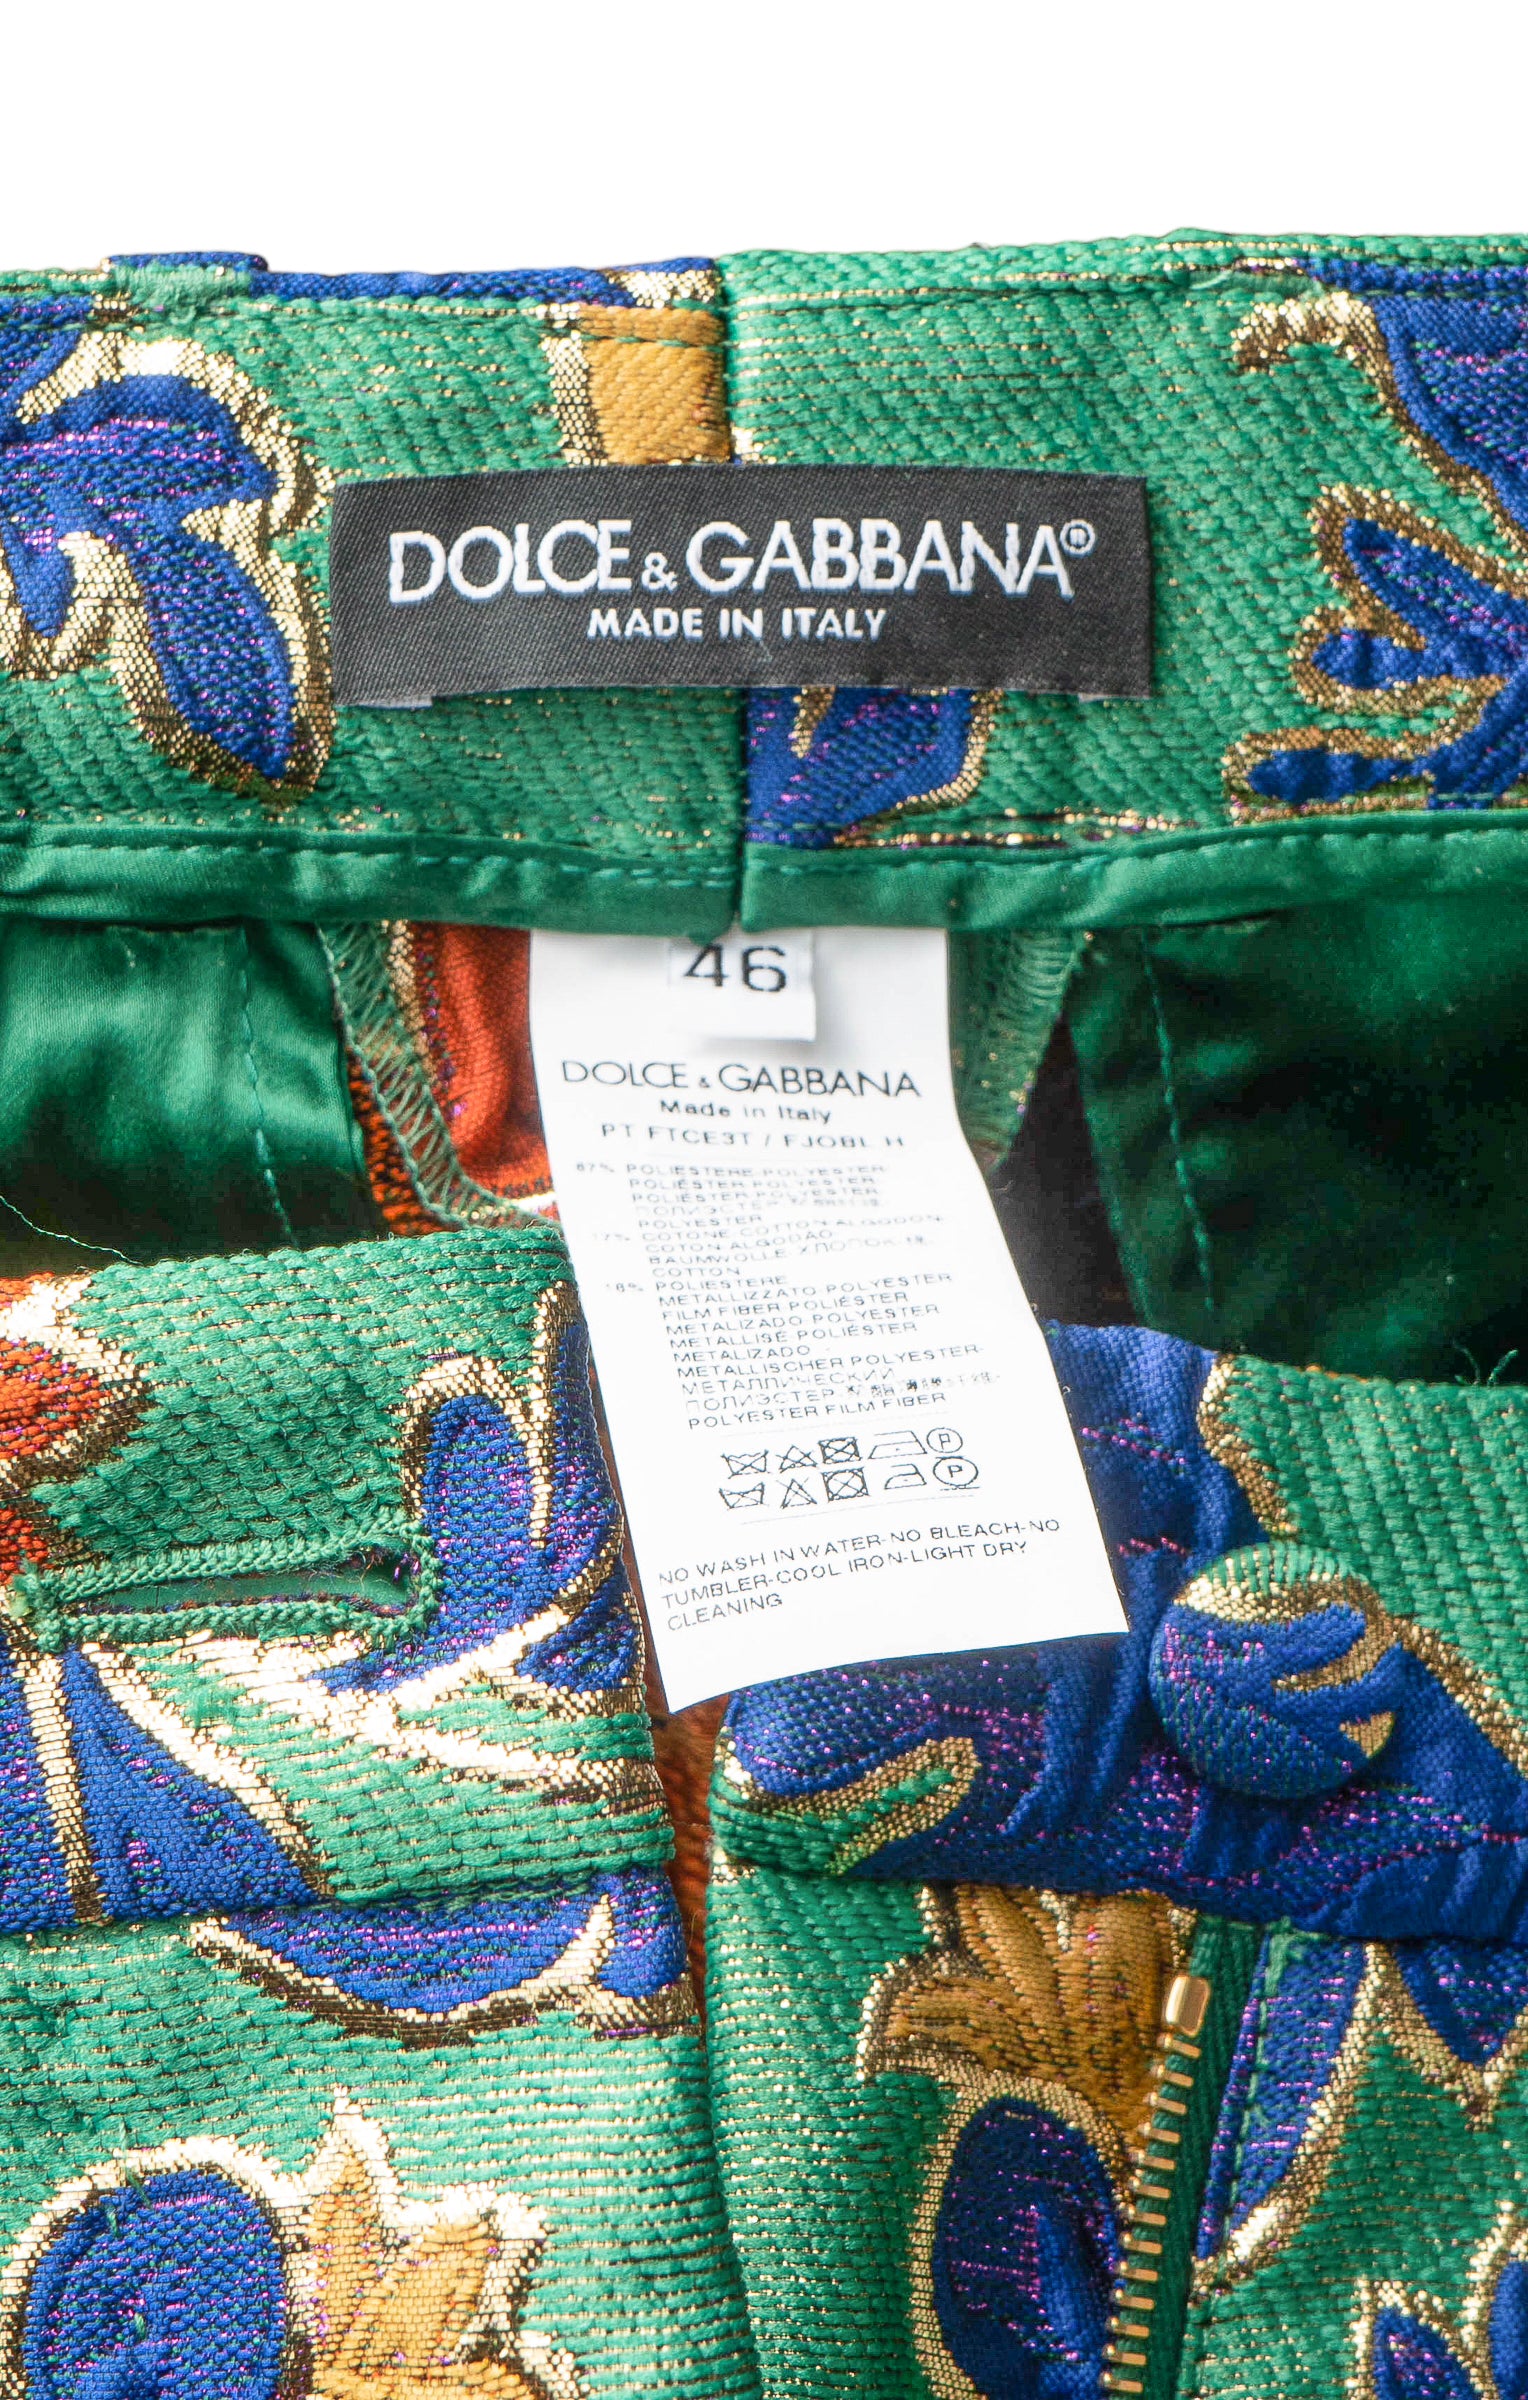 DOLCE & GABBANA (RARE & NEW) with tags Pants Size: IT 46 / Comparable to US 8-10